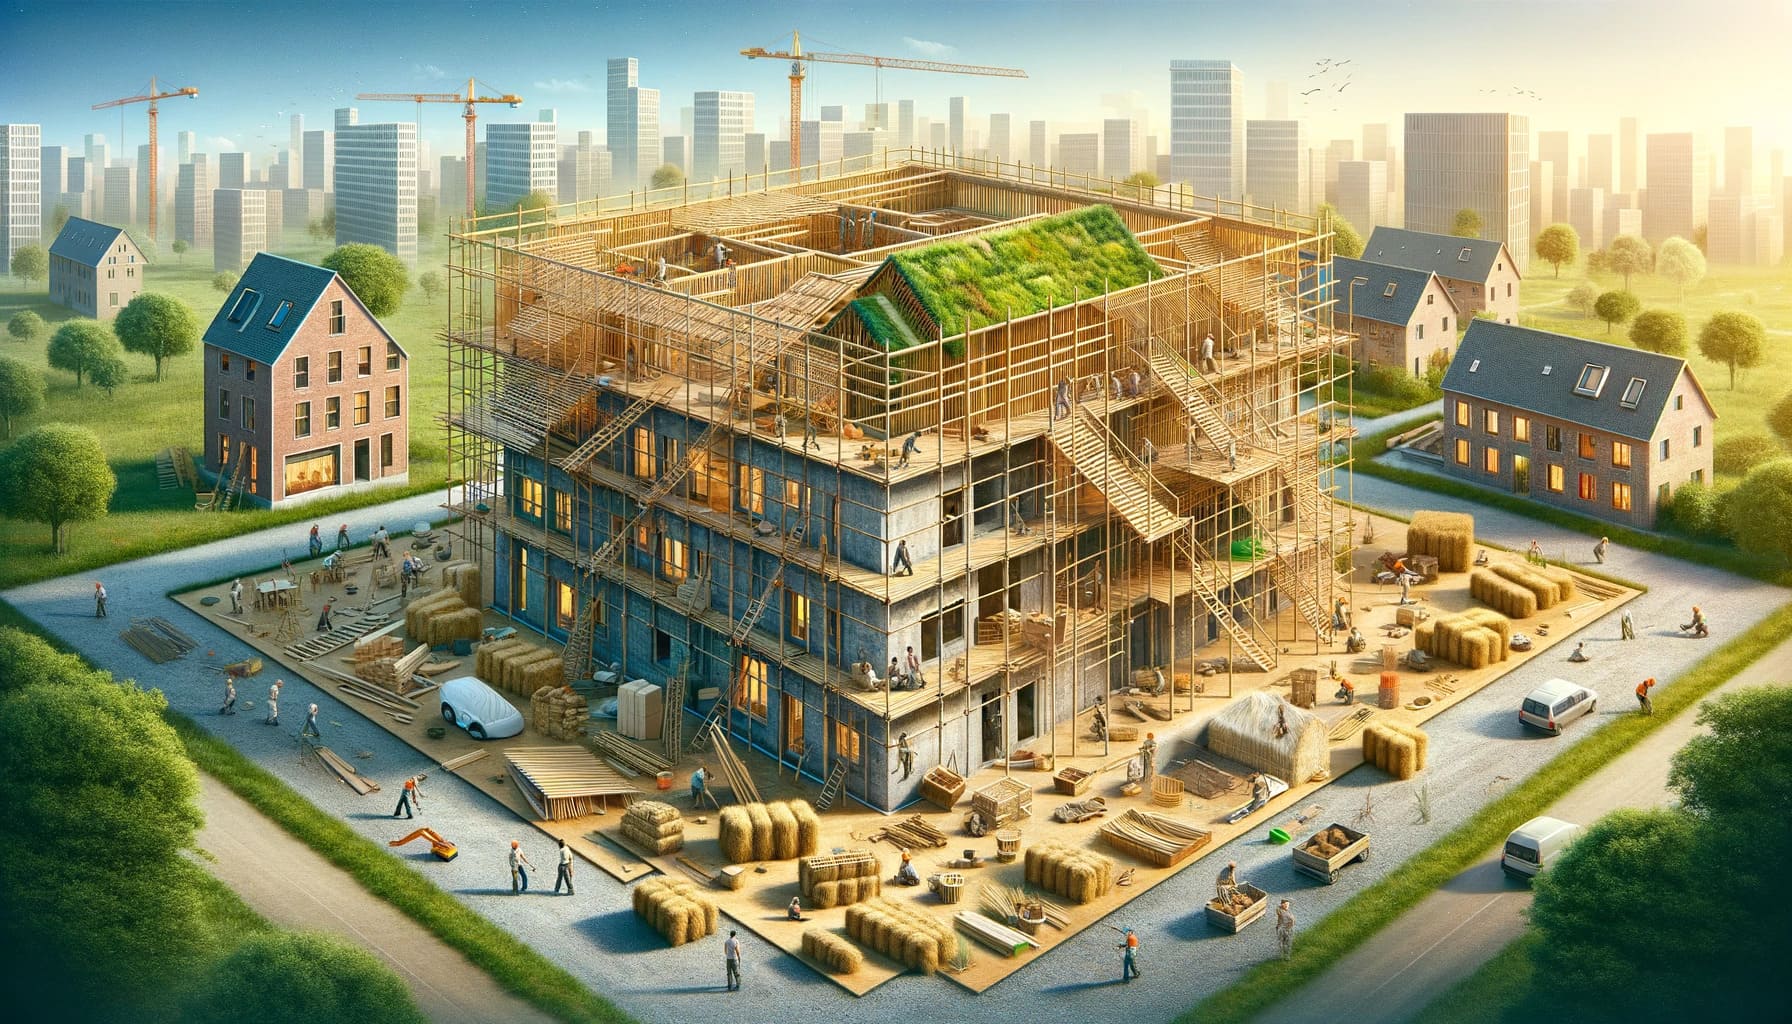 biobased construction. The image shows a construction site where buildings are being built using natur